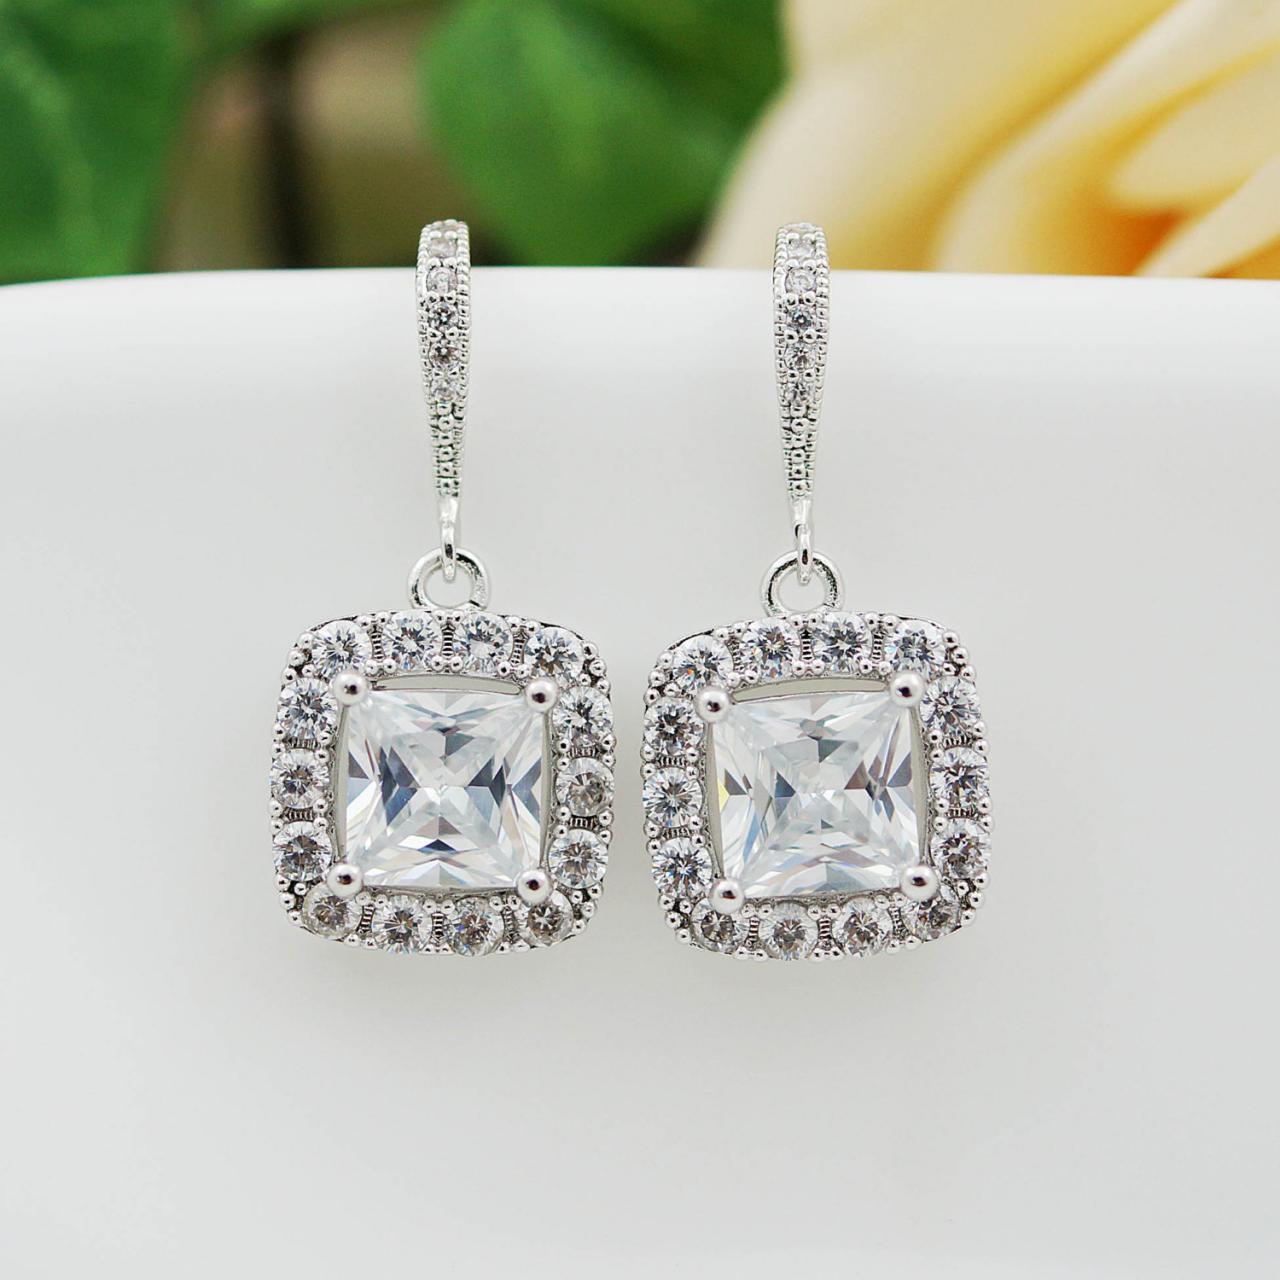 Wedding Bridal Jewelry Bridal Earrings Dangle Earrings Clear (lux) Cubic Zirconia Halo Style Square Drop Earrings Bridesmaid Gift